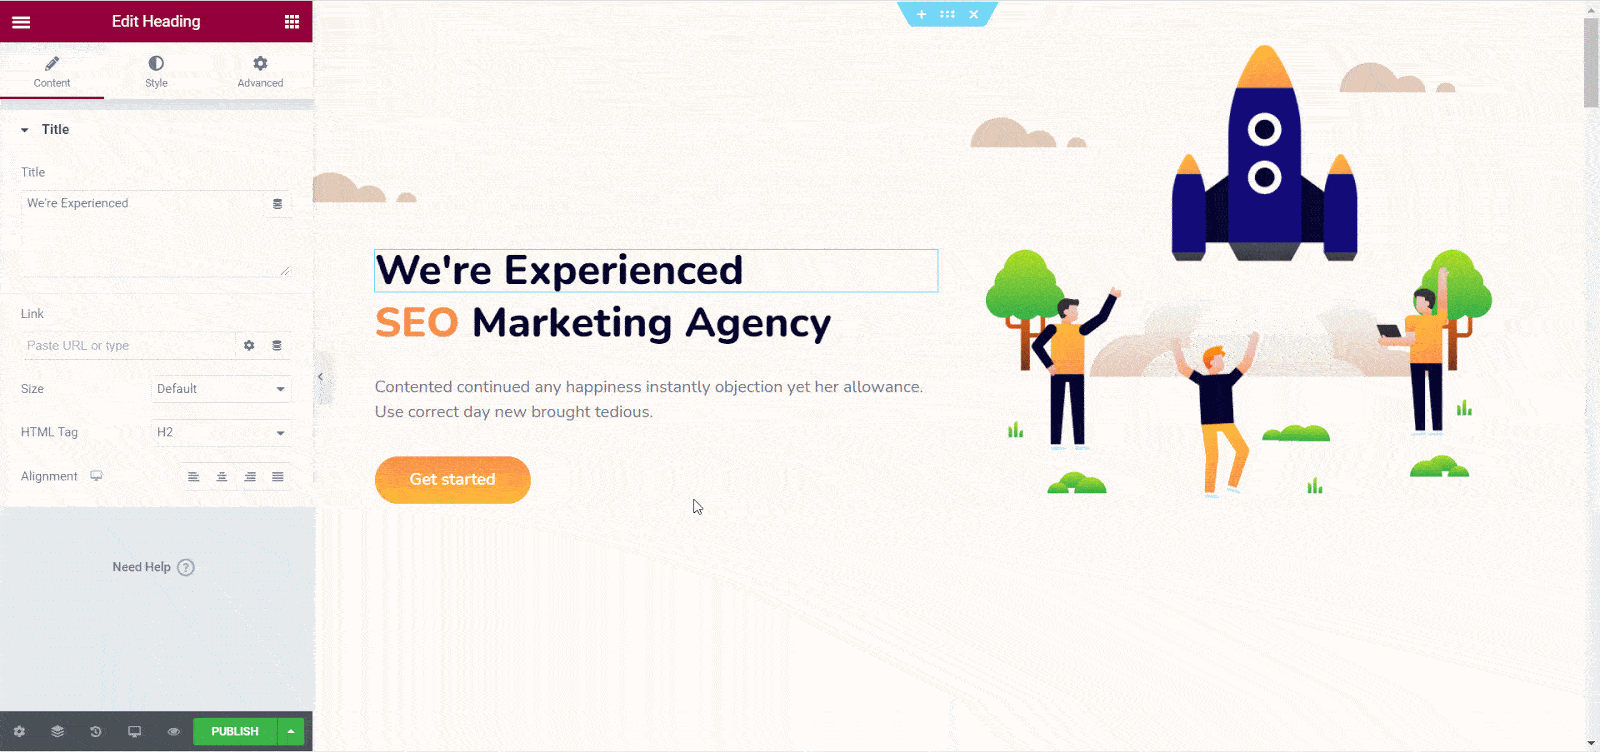 How To Start Your Own SEO Marketing Agency Business: Complete Guide 4